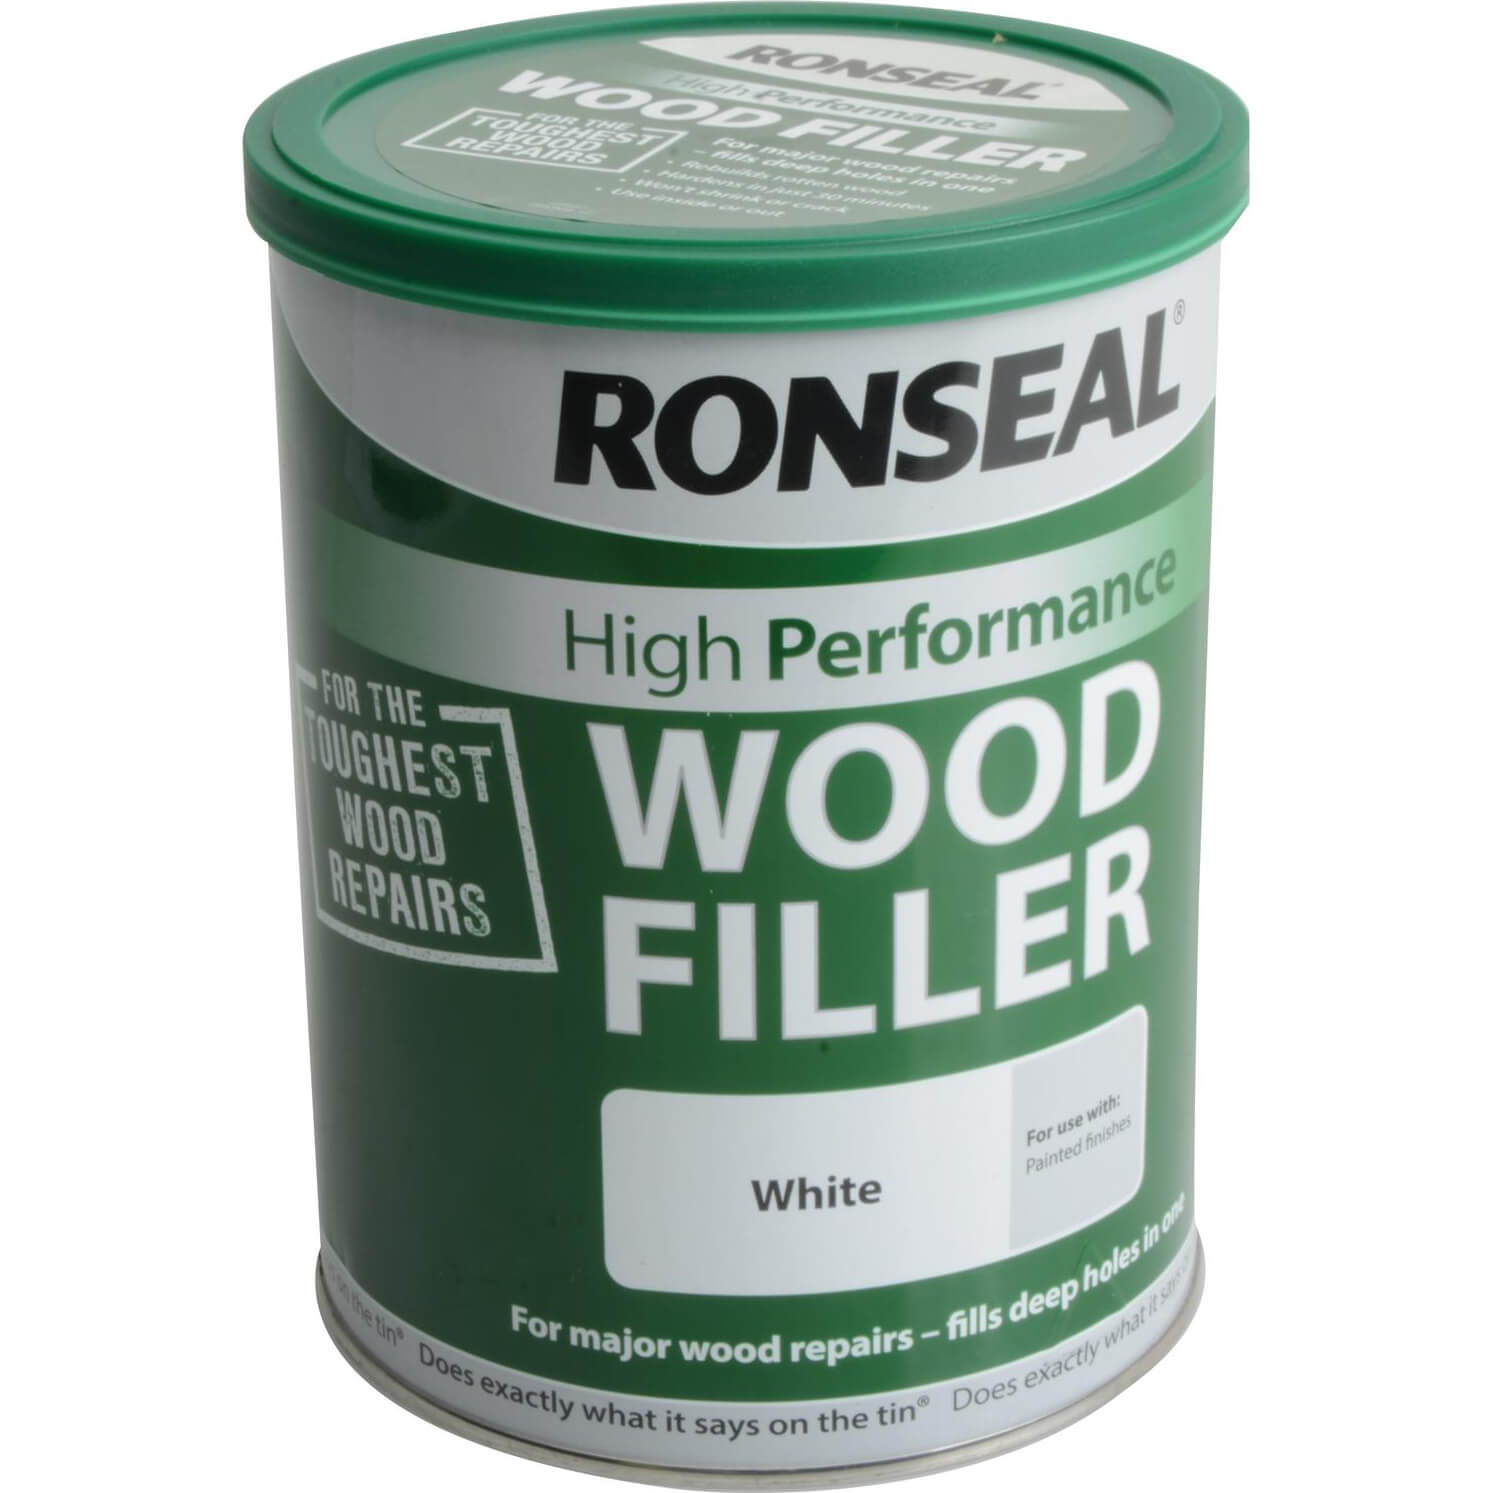 Image of Ronseal High Performance Wood Filler White 1000g